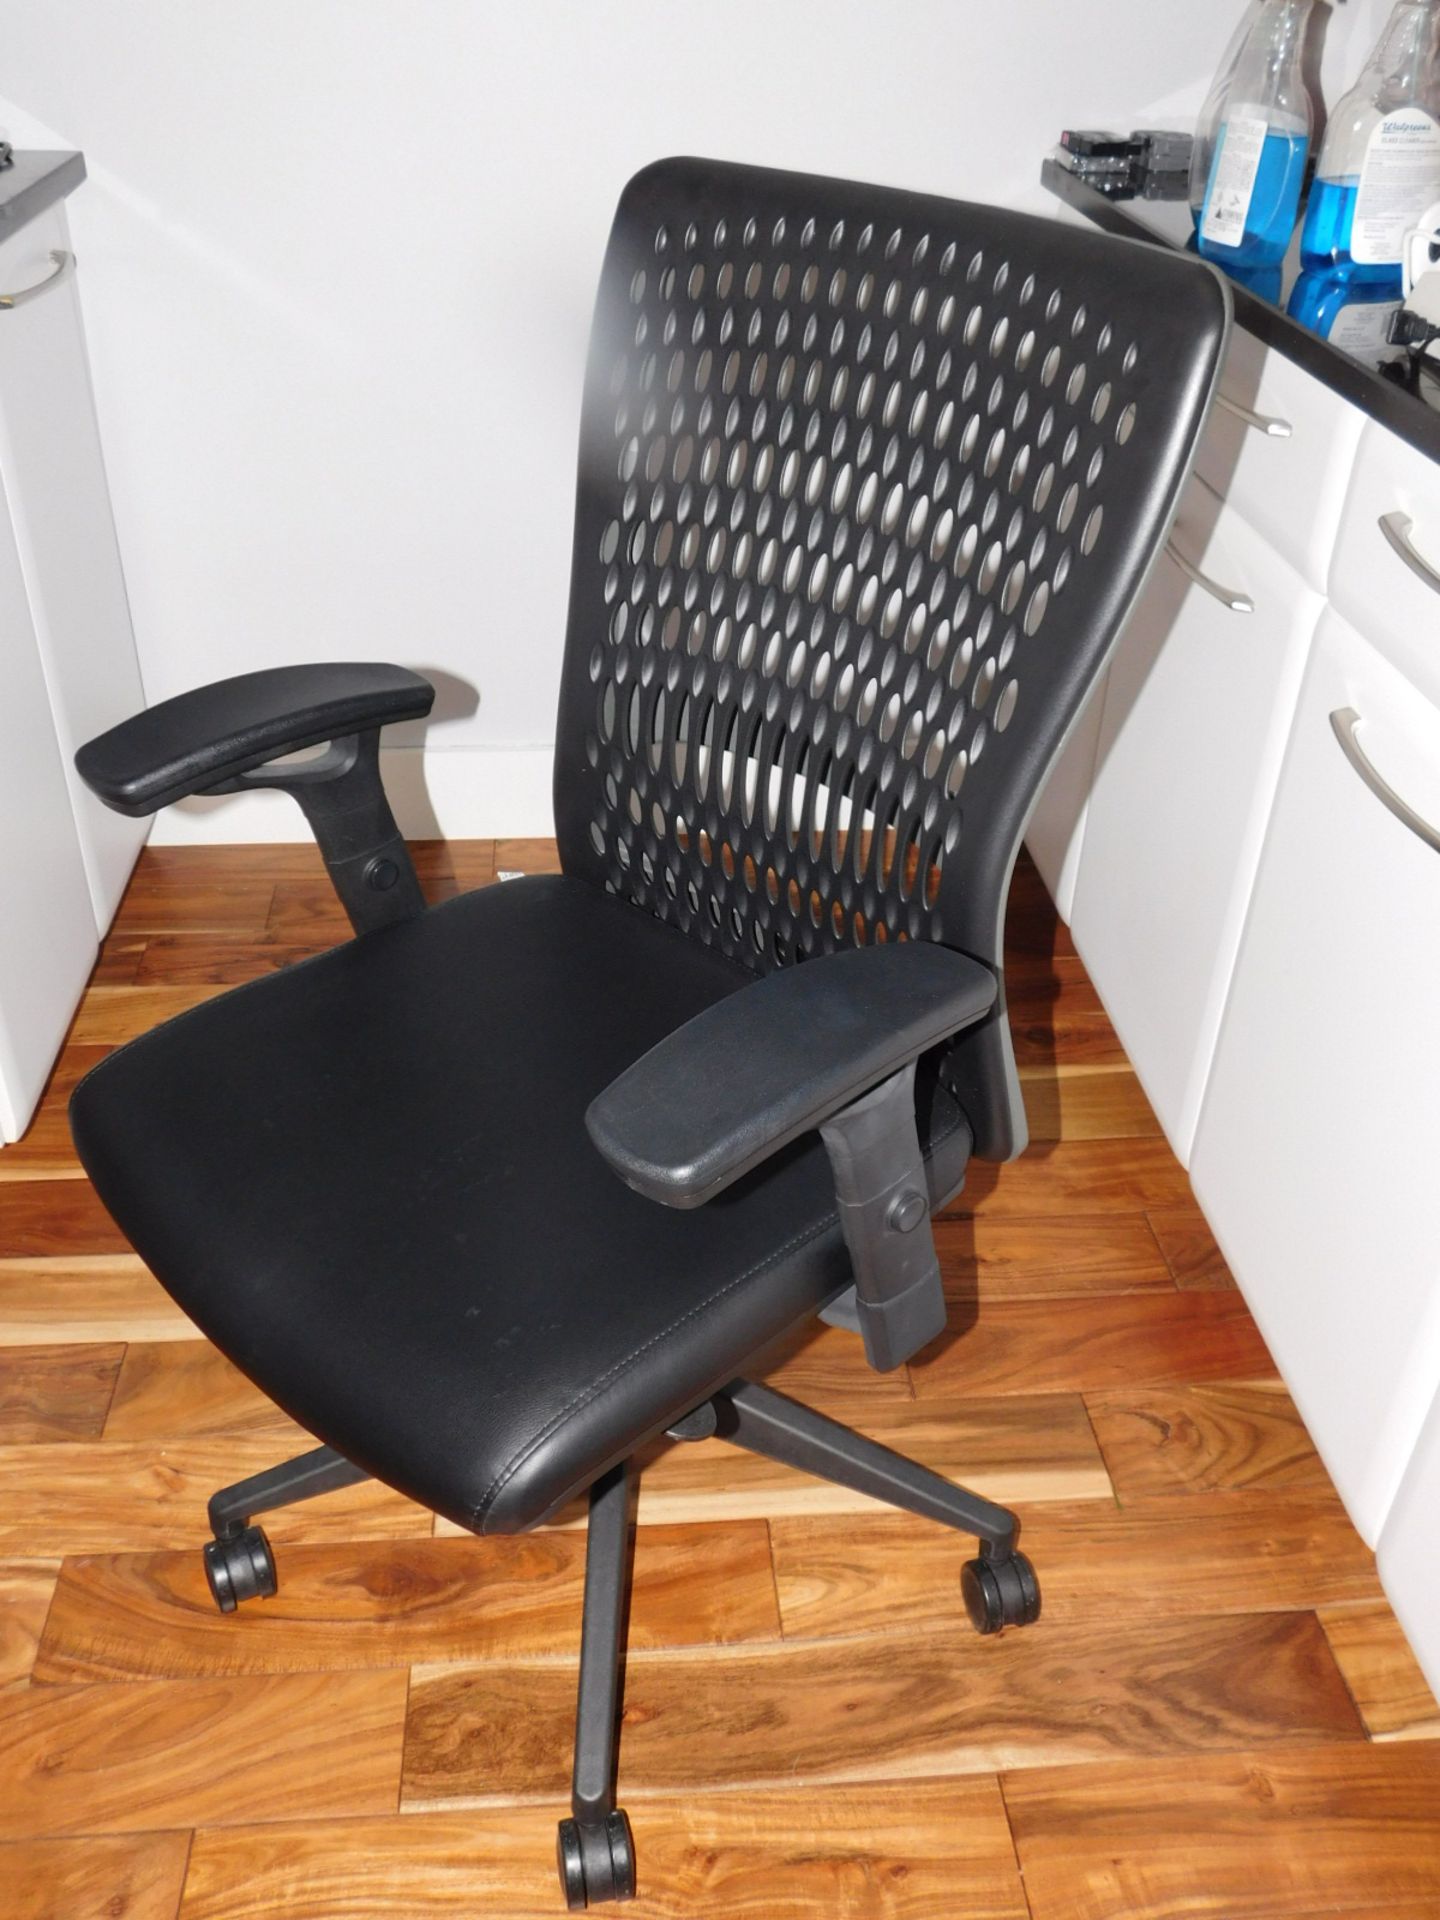 BOSS ERGONOMIC TASK CHAIR, PNEUMATIC OPERAGTED, ADJUSTABLE BACK AND ARMS, 5 STAR BASE, CARPET